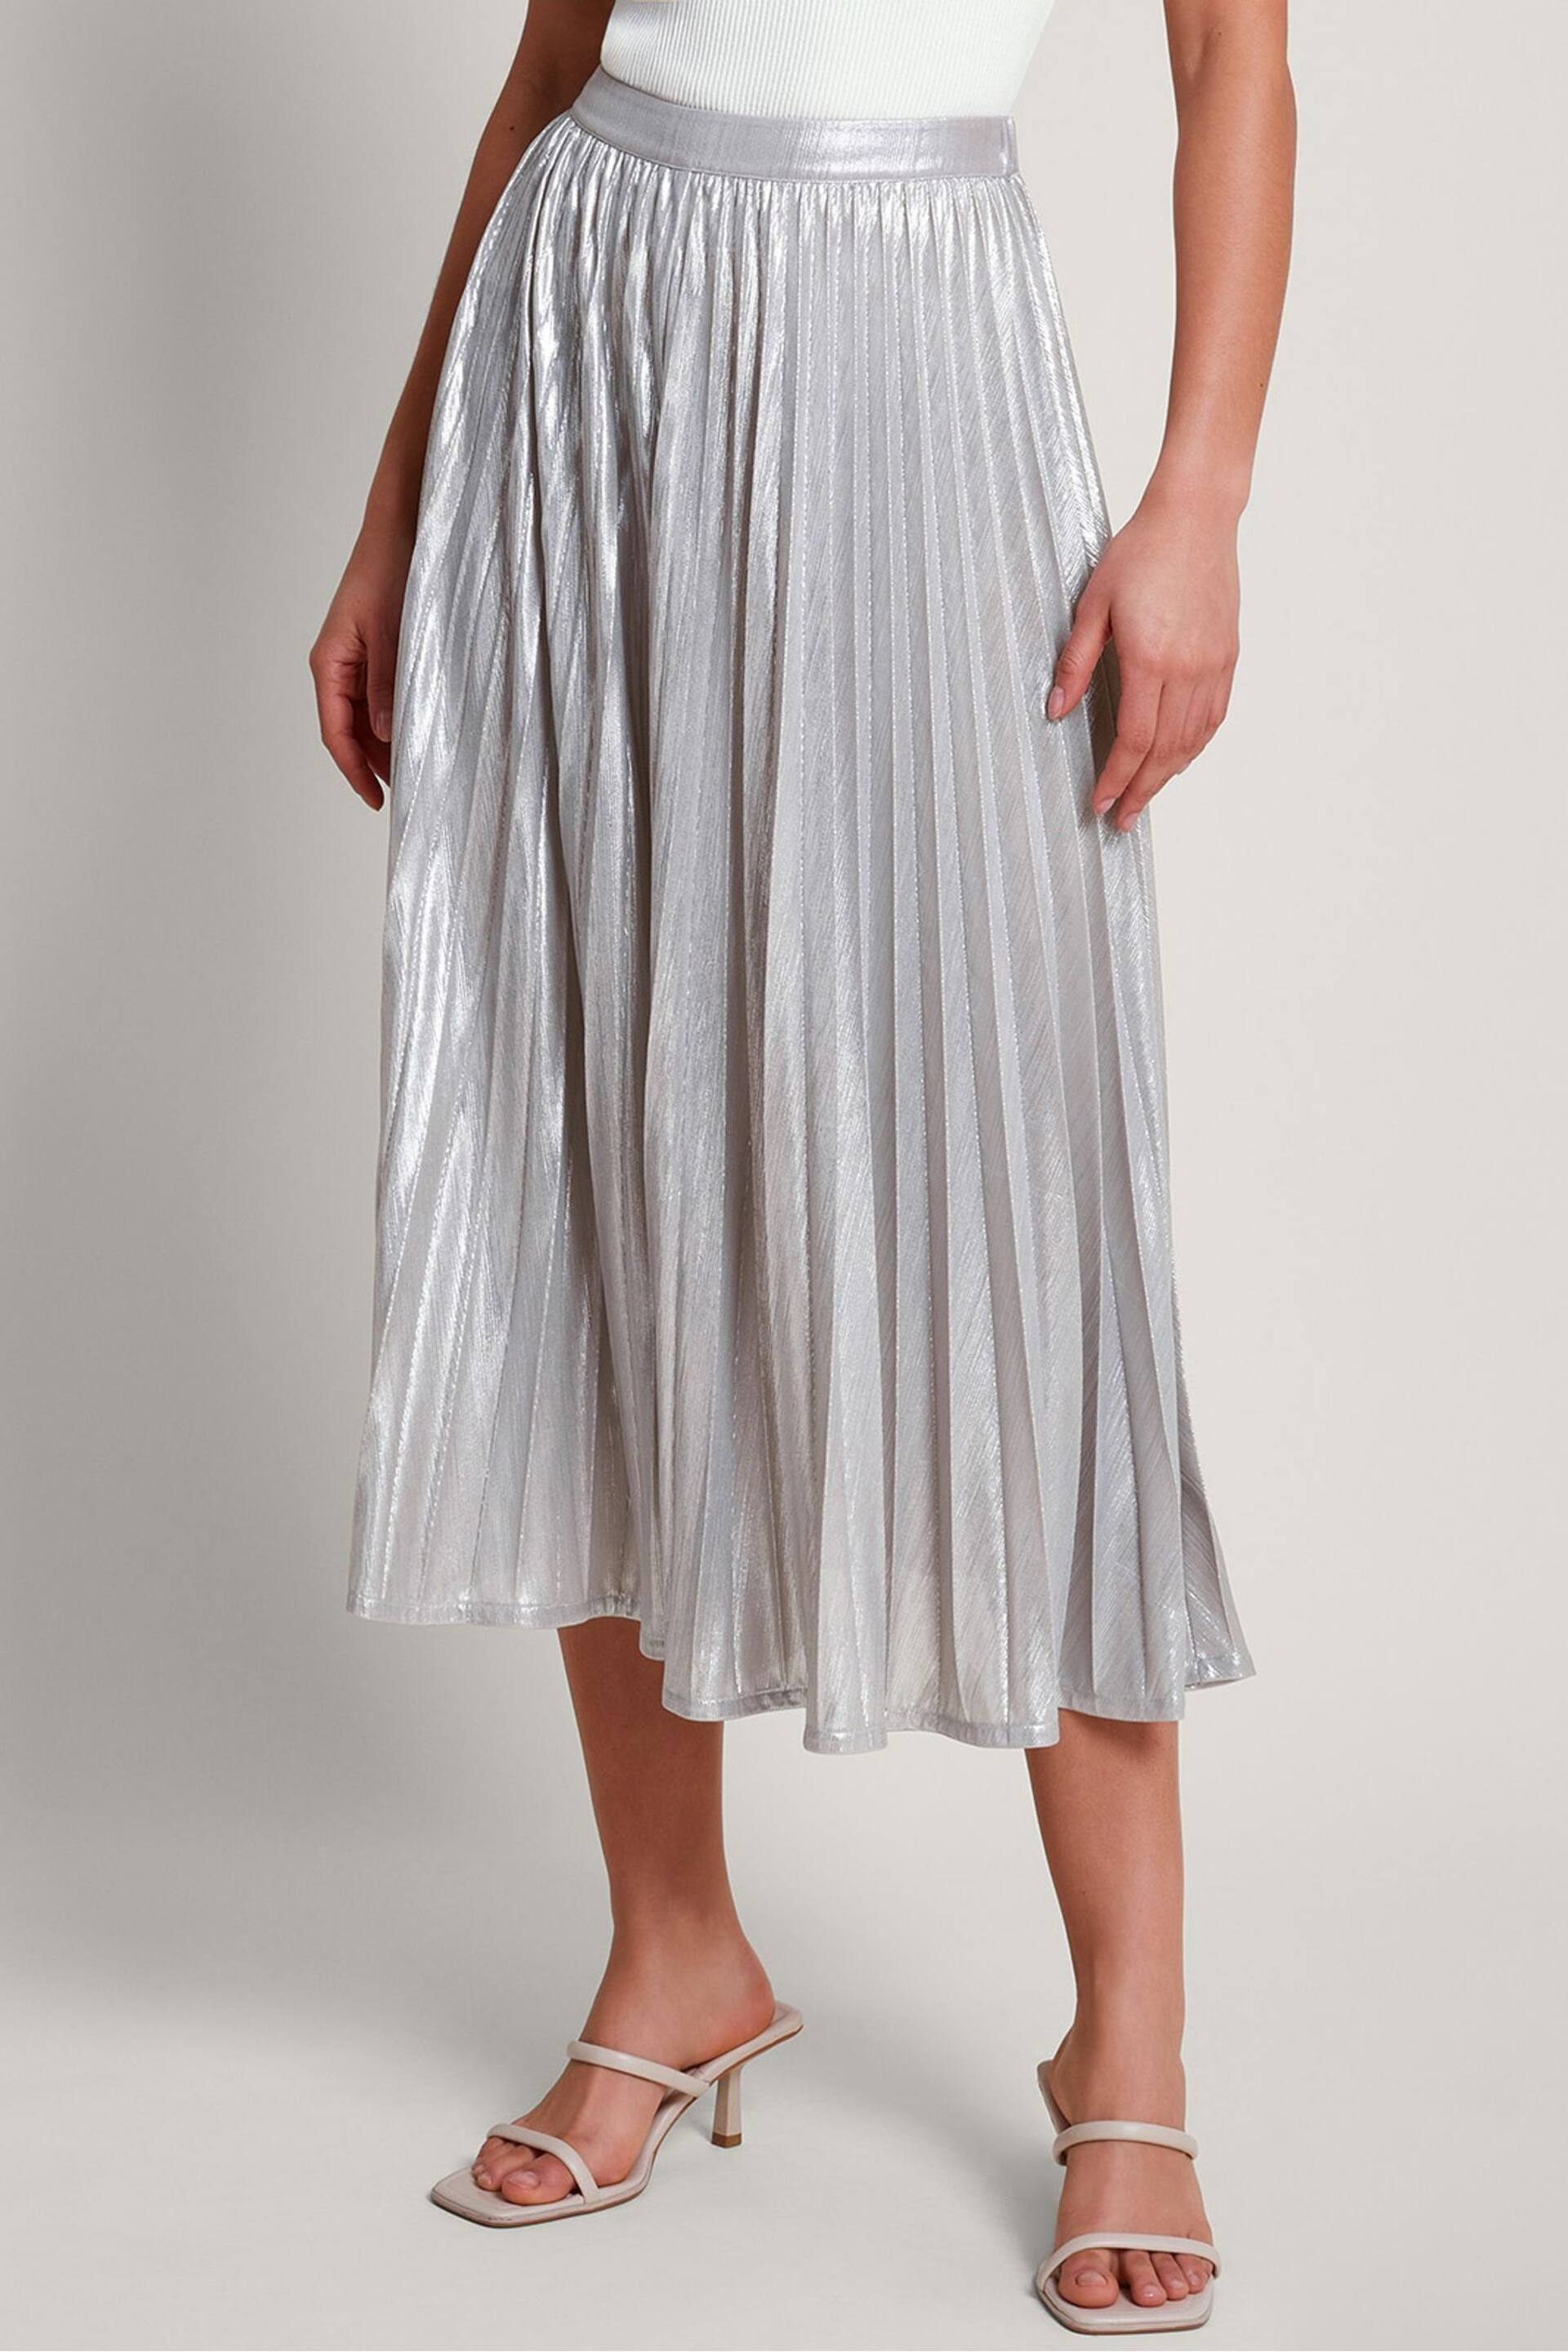 Monsoon Silver Mia Pleated Skirt - Image 3 of 4